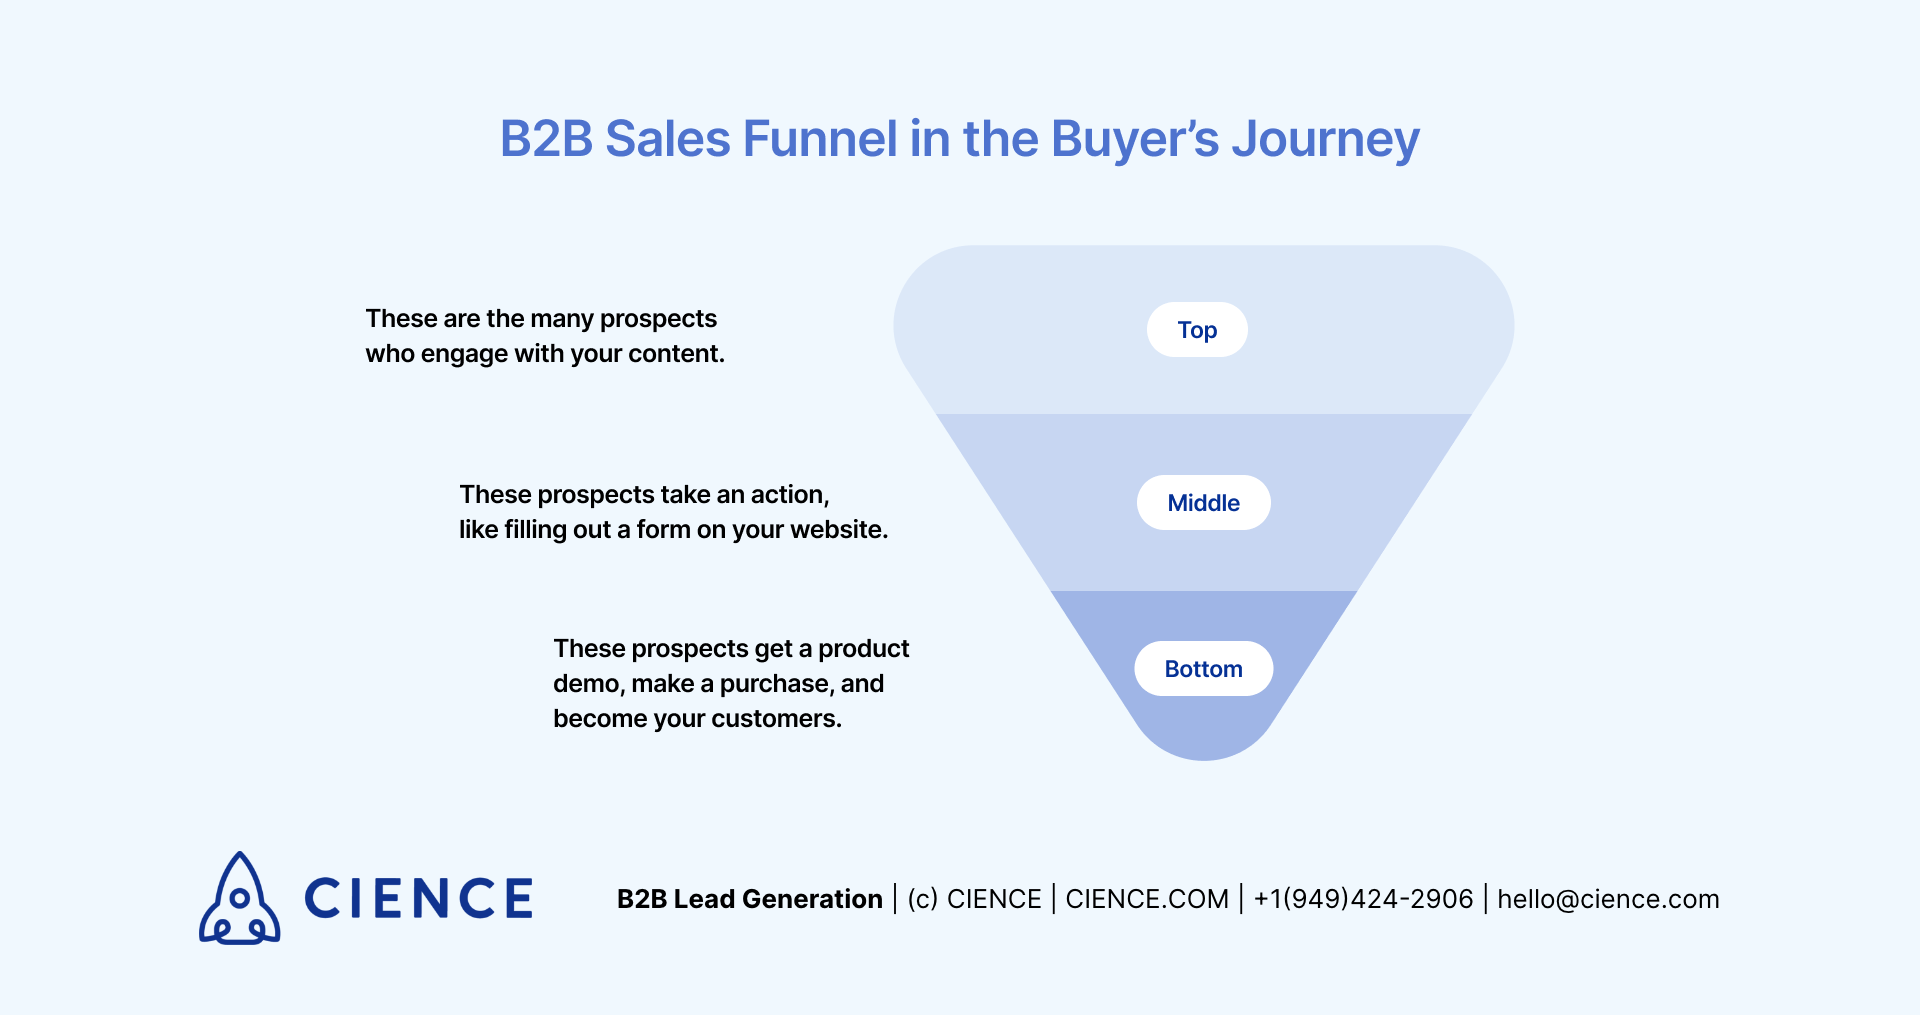 B2B Sales Funnel in the Buyer's Journey